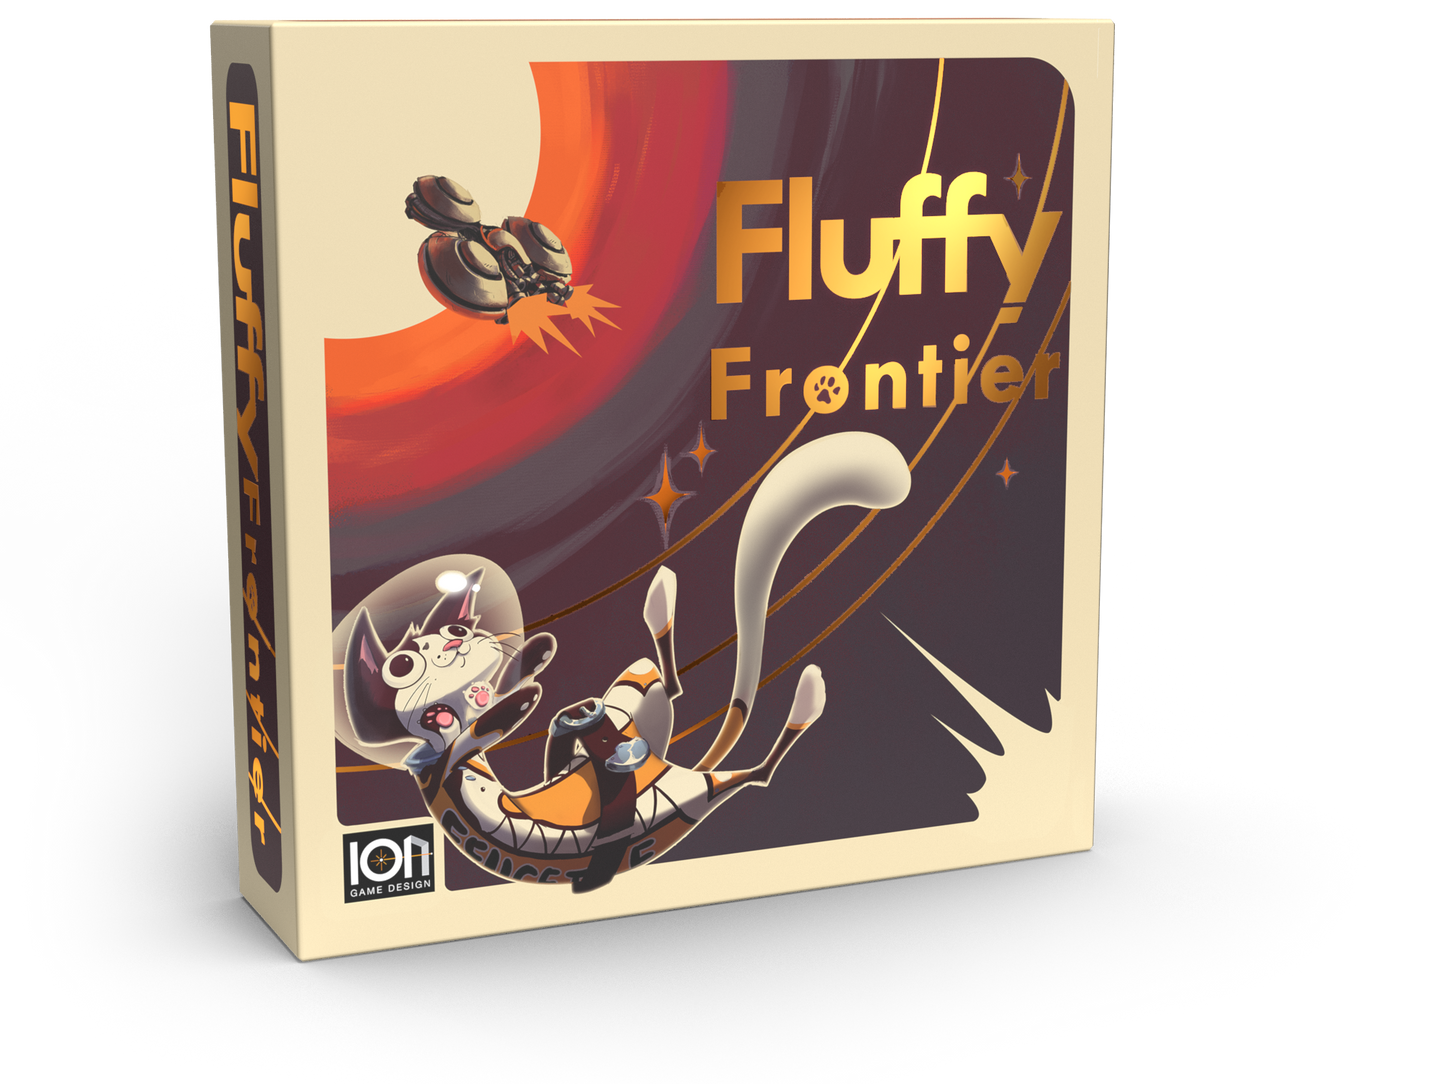 Fluffy Frontier Board Game - 3D front box cover